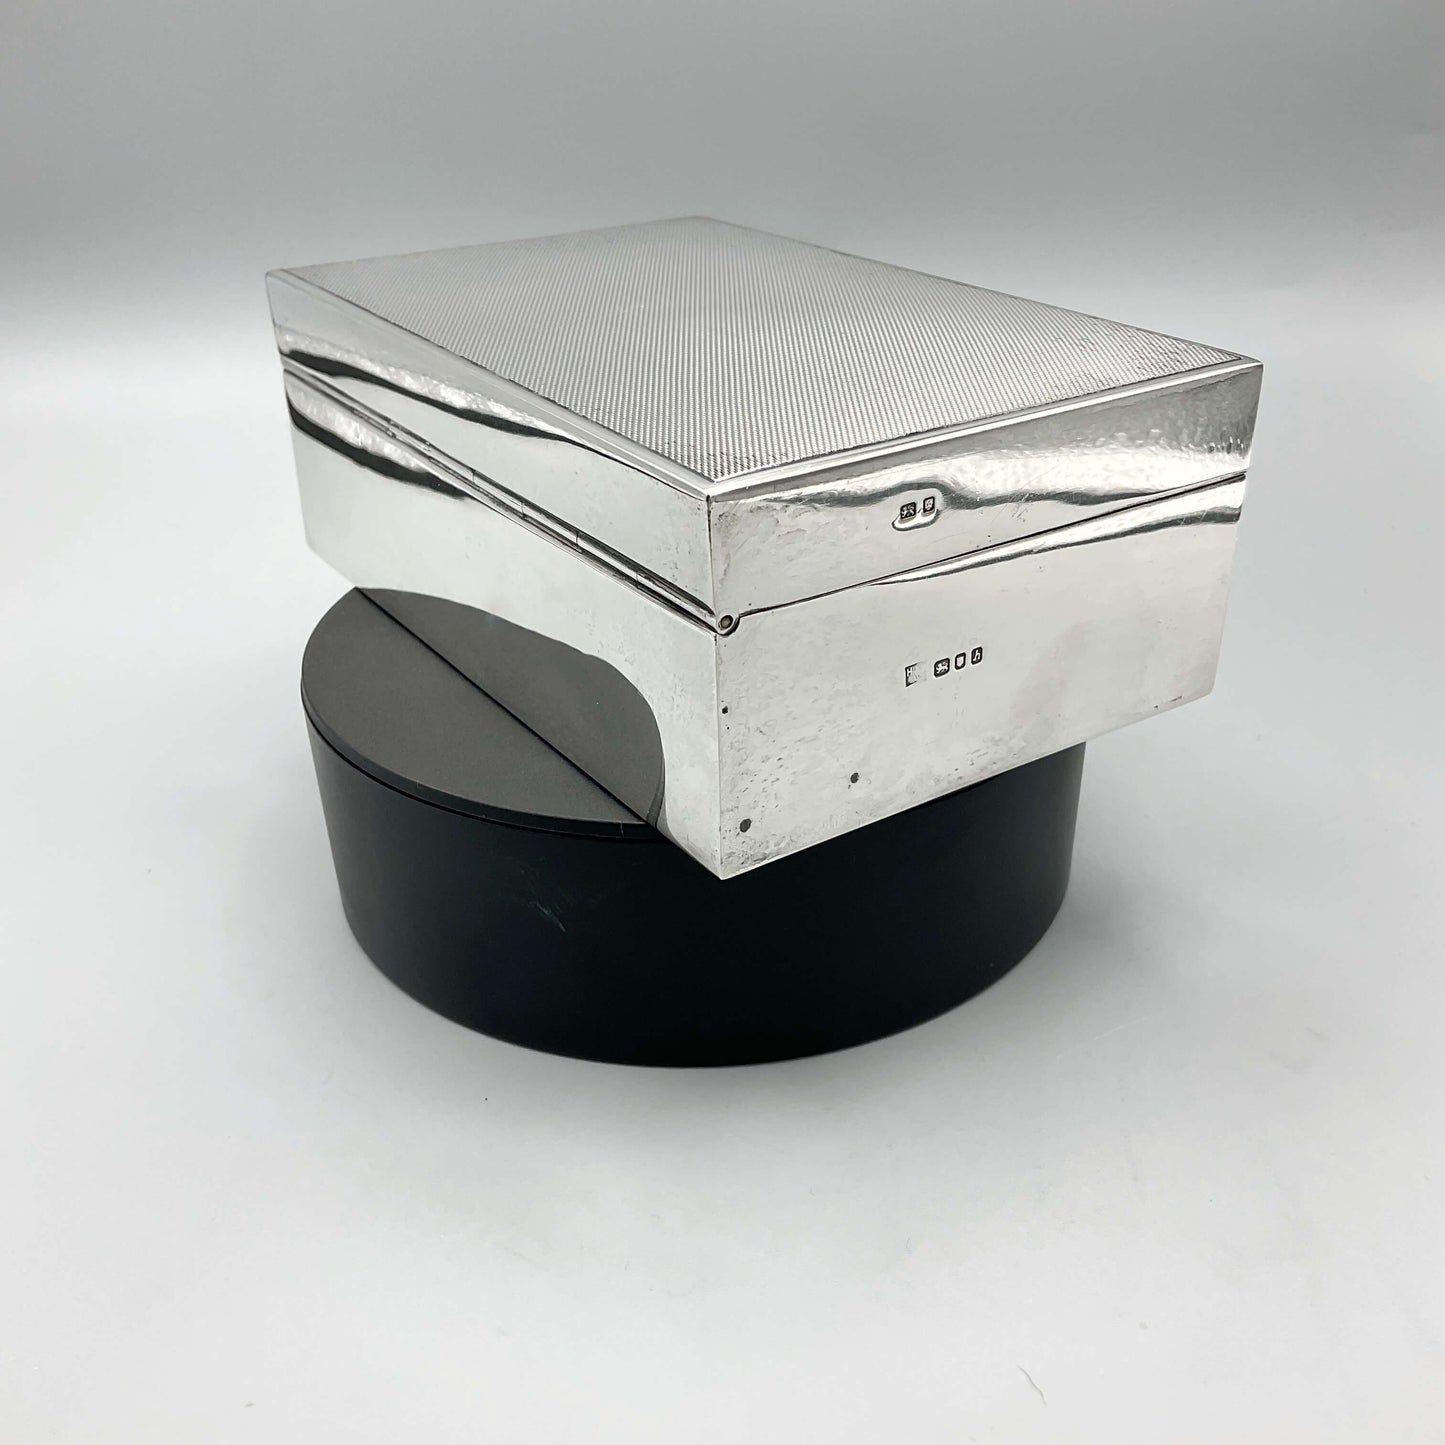 sterilng silver cigarette box with hallmarks and makers mark on the side on a turntable